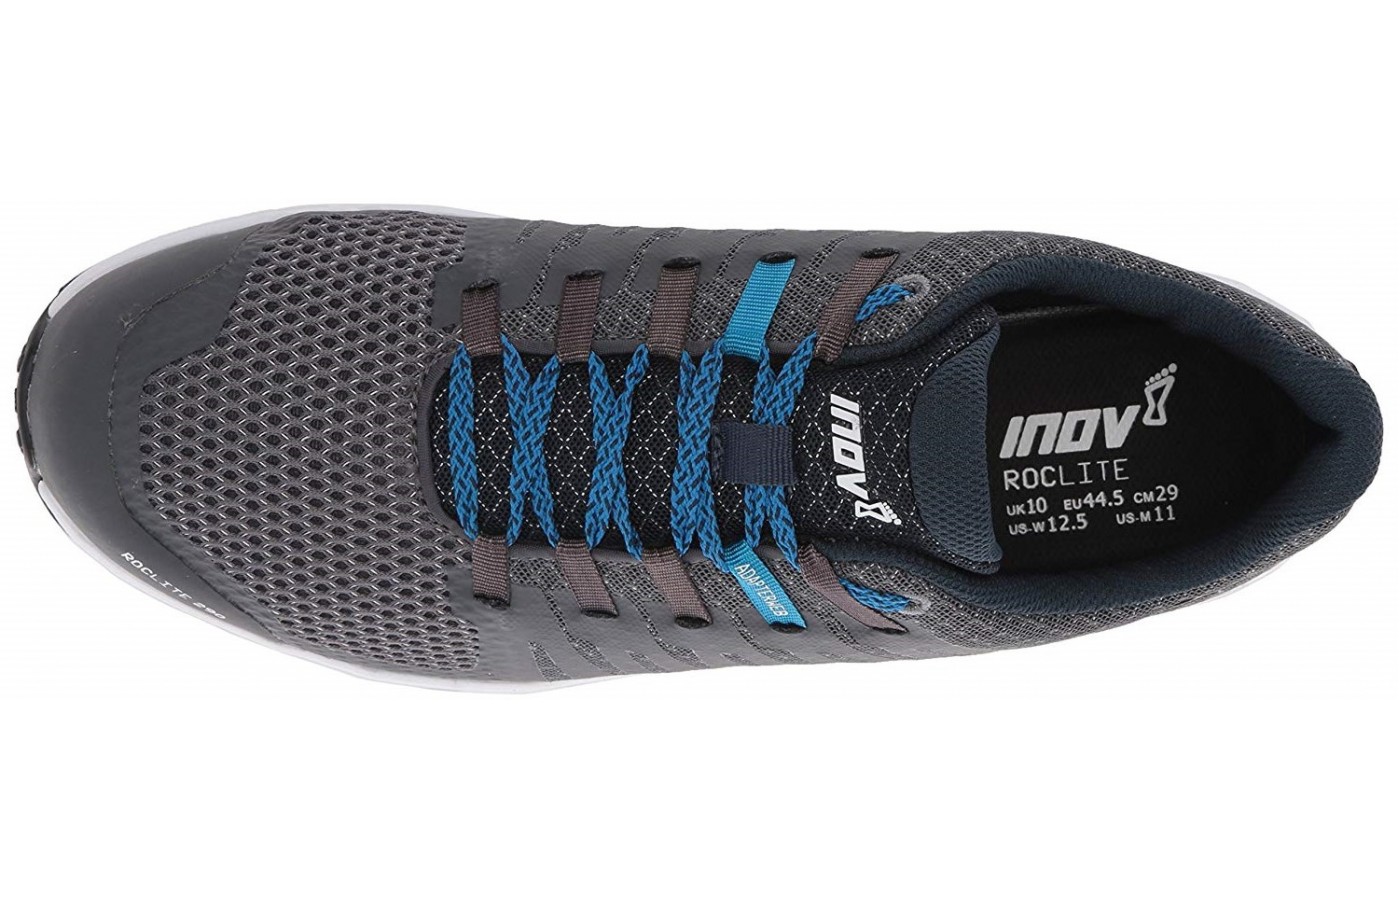 Inov-8 intended to build the upper of the Roclite 290 with mesh that was breathable, protected the foot, and kept it comfortable by permitting airflow into the shoe chamber. 